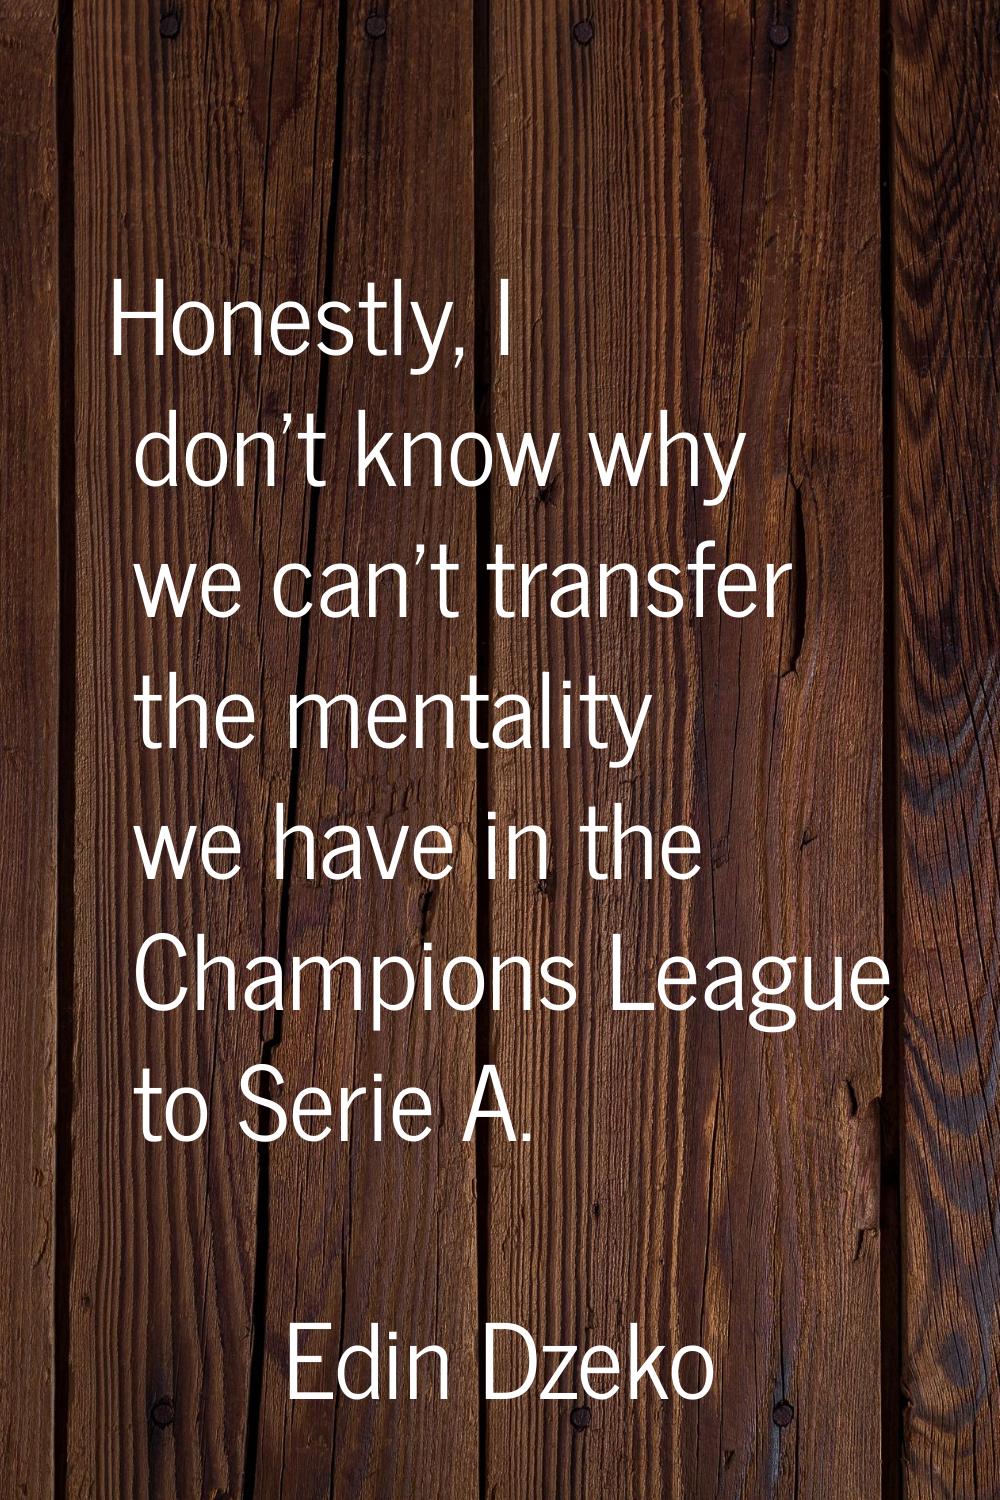 Honestly, I don't know why we can't transfer the mentality we have in the Champions League to Serie